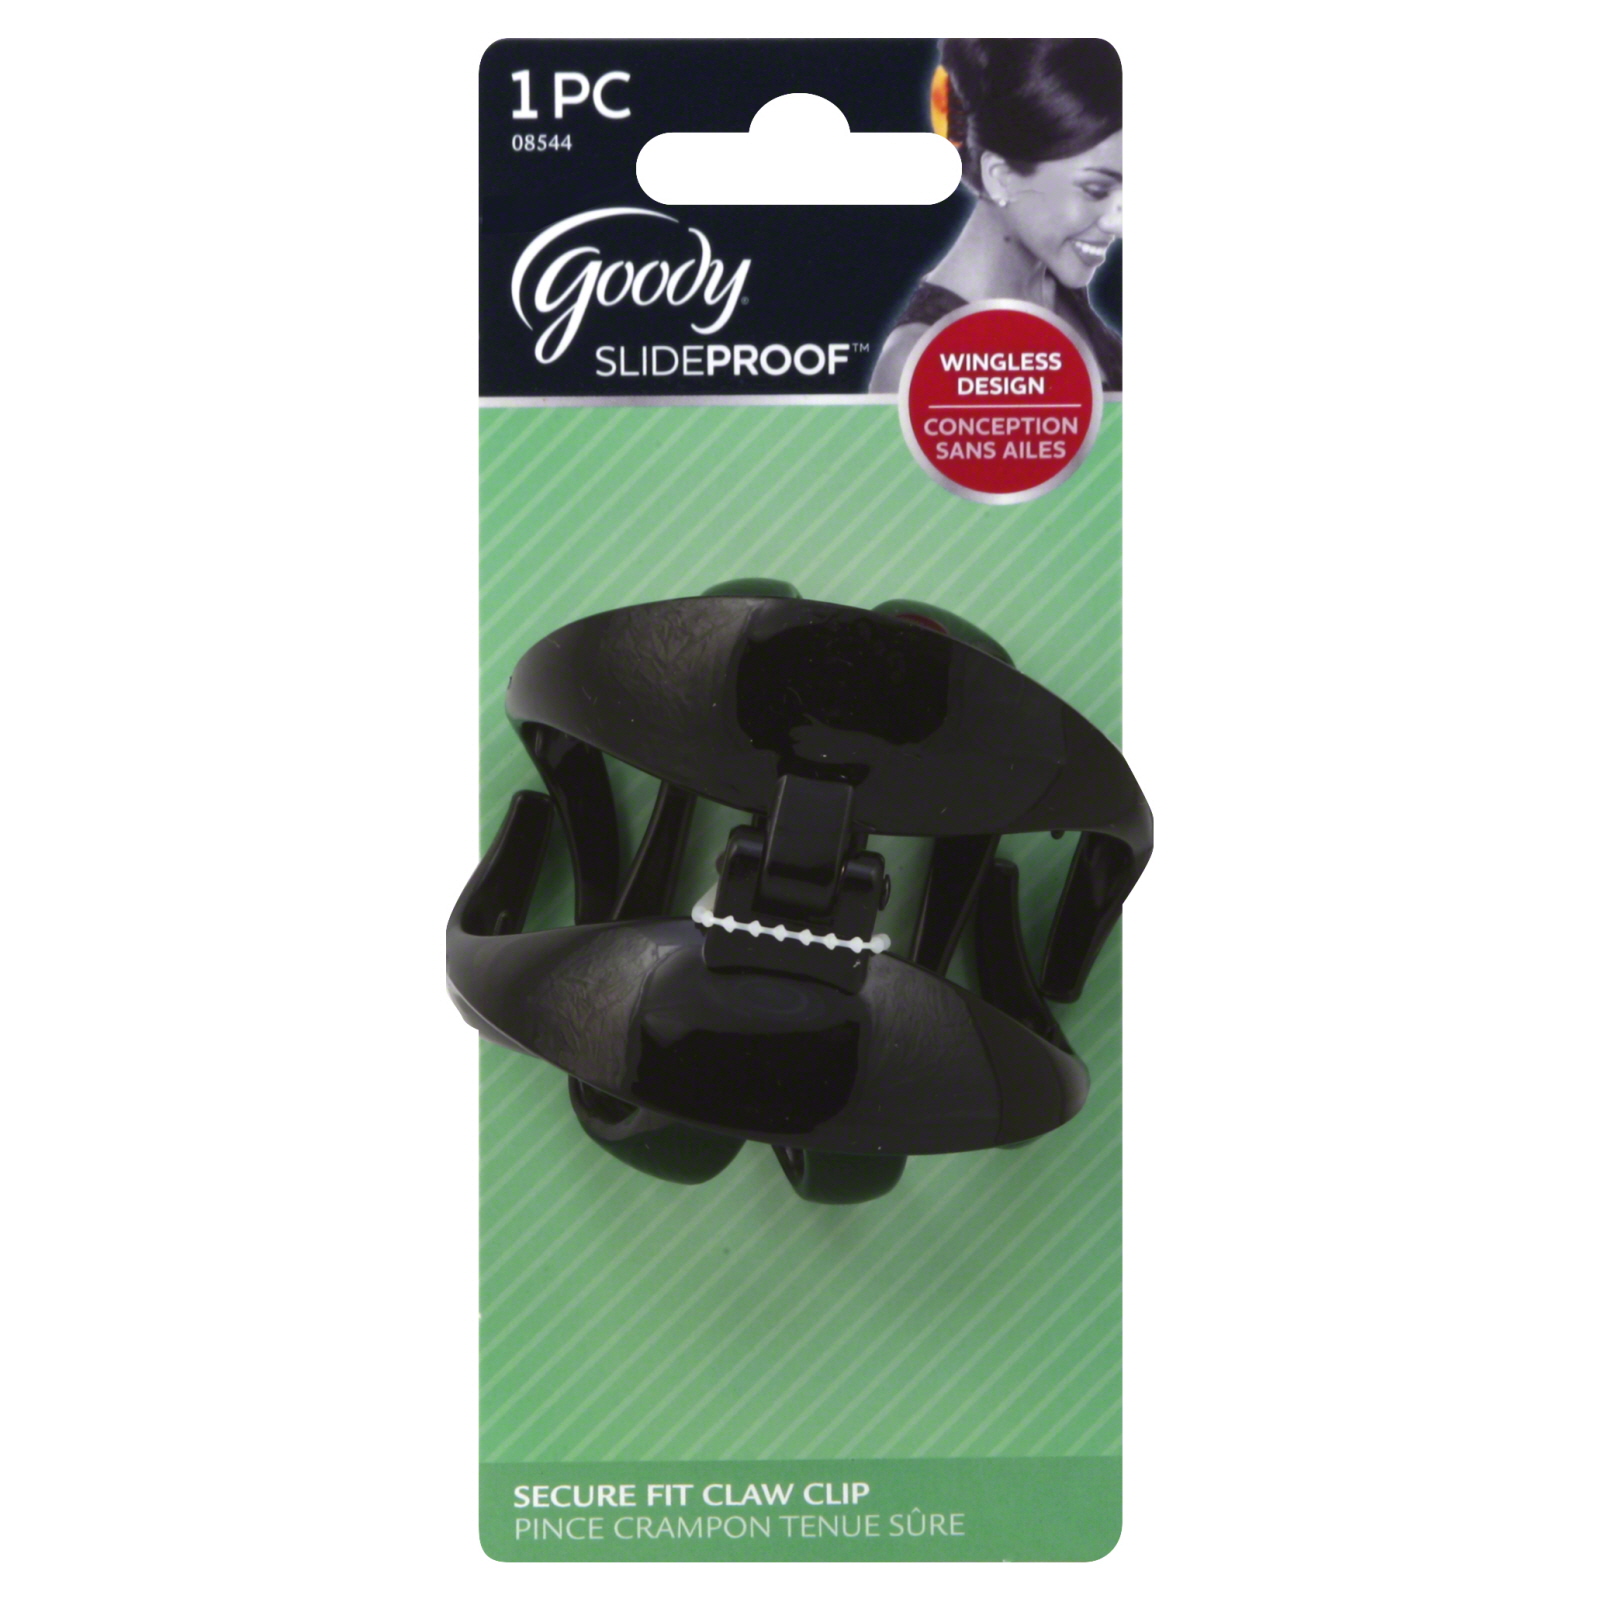 Goody SlideProof Wingless Large Claw Clip, 1 CT